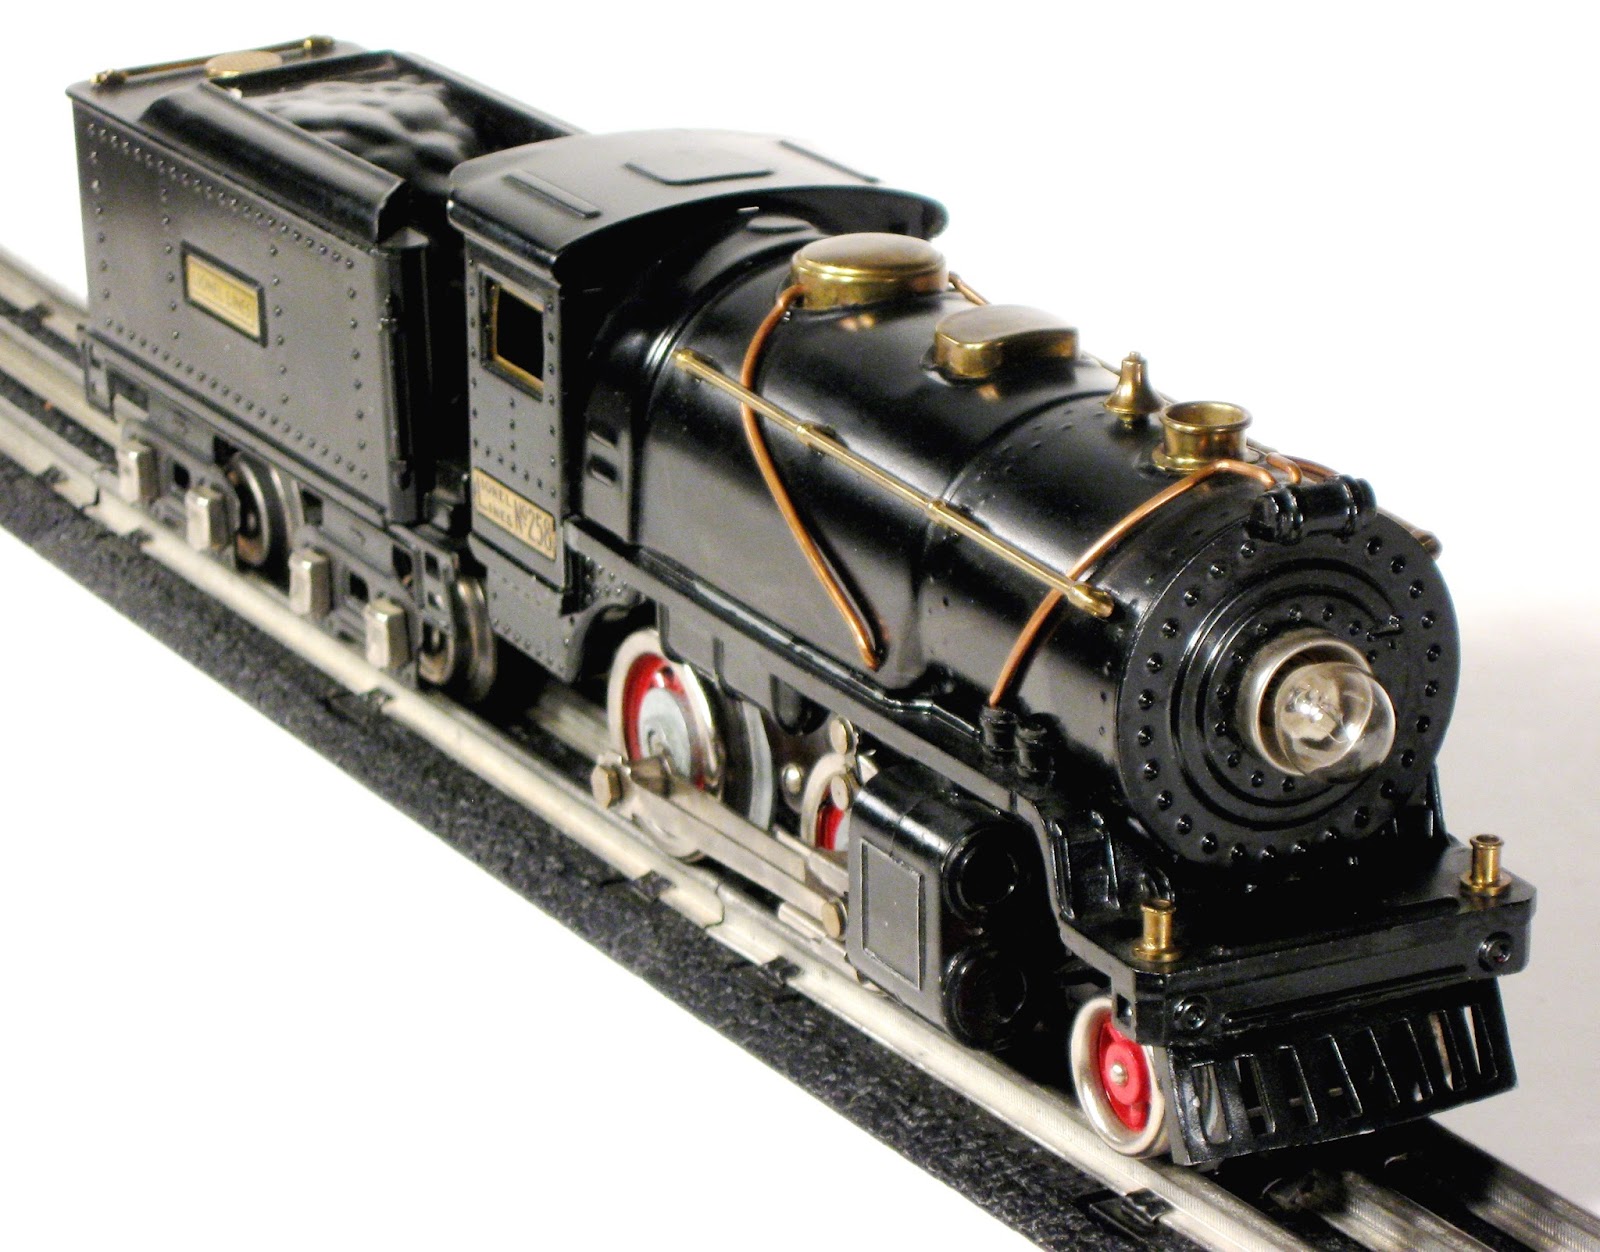 Toys and Stuff: Train Time - Lionel #258 Steam Locomotive